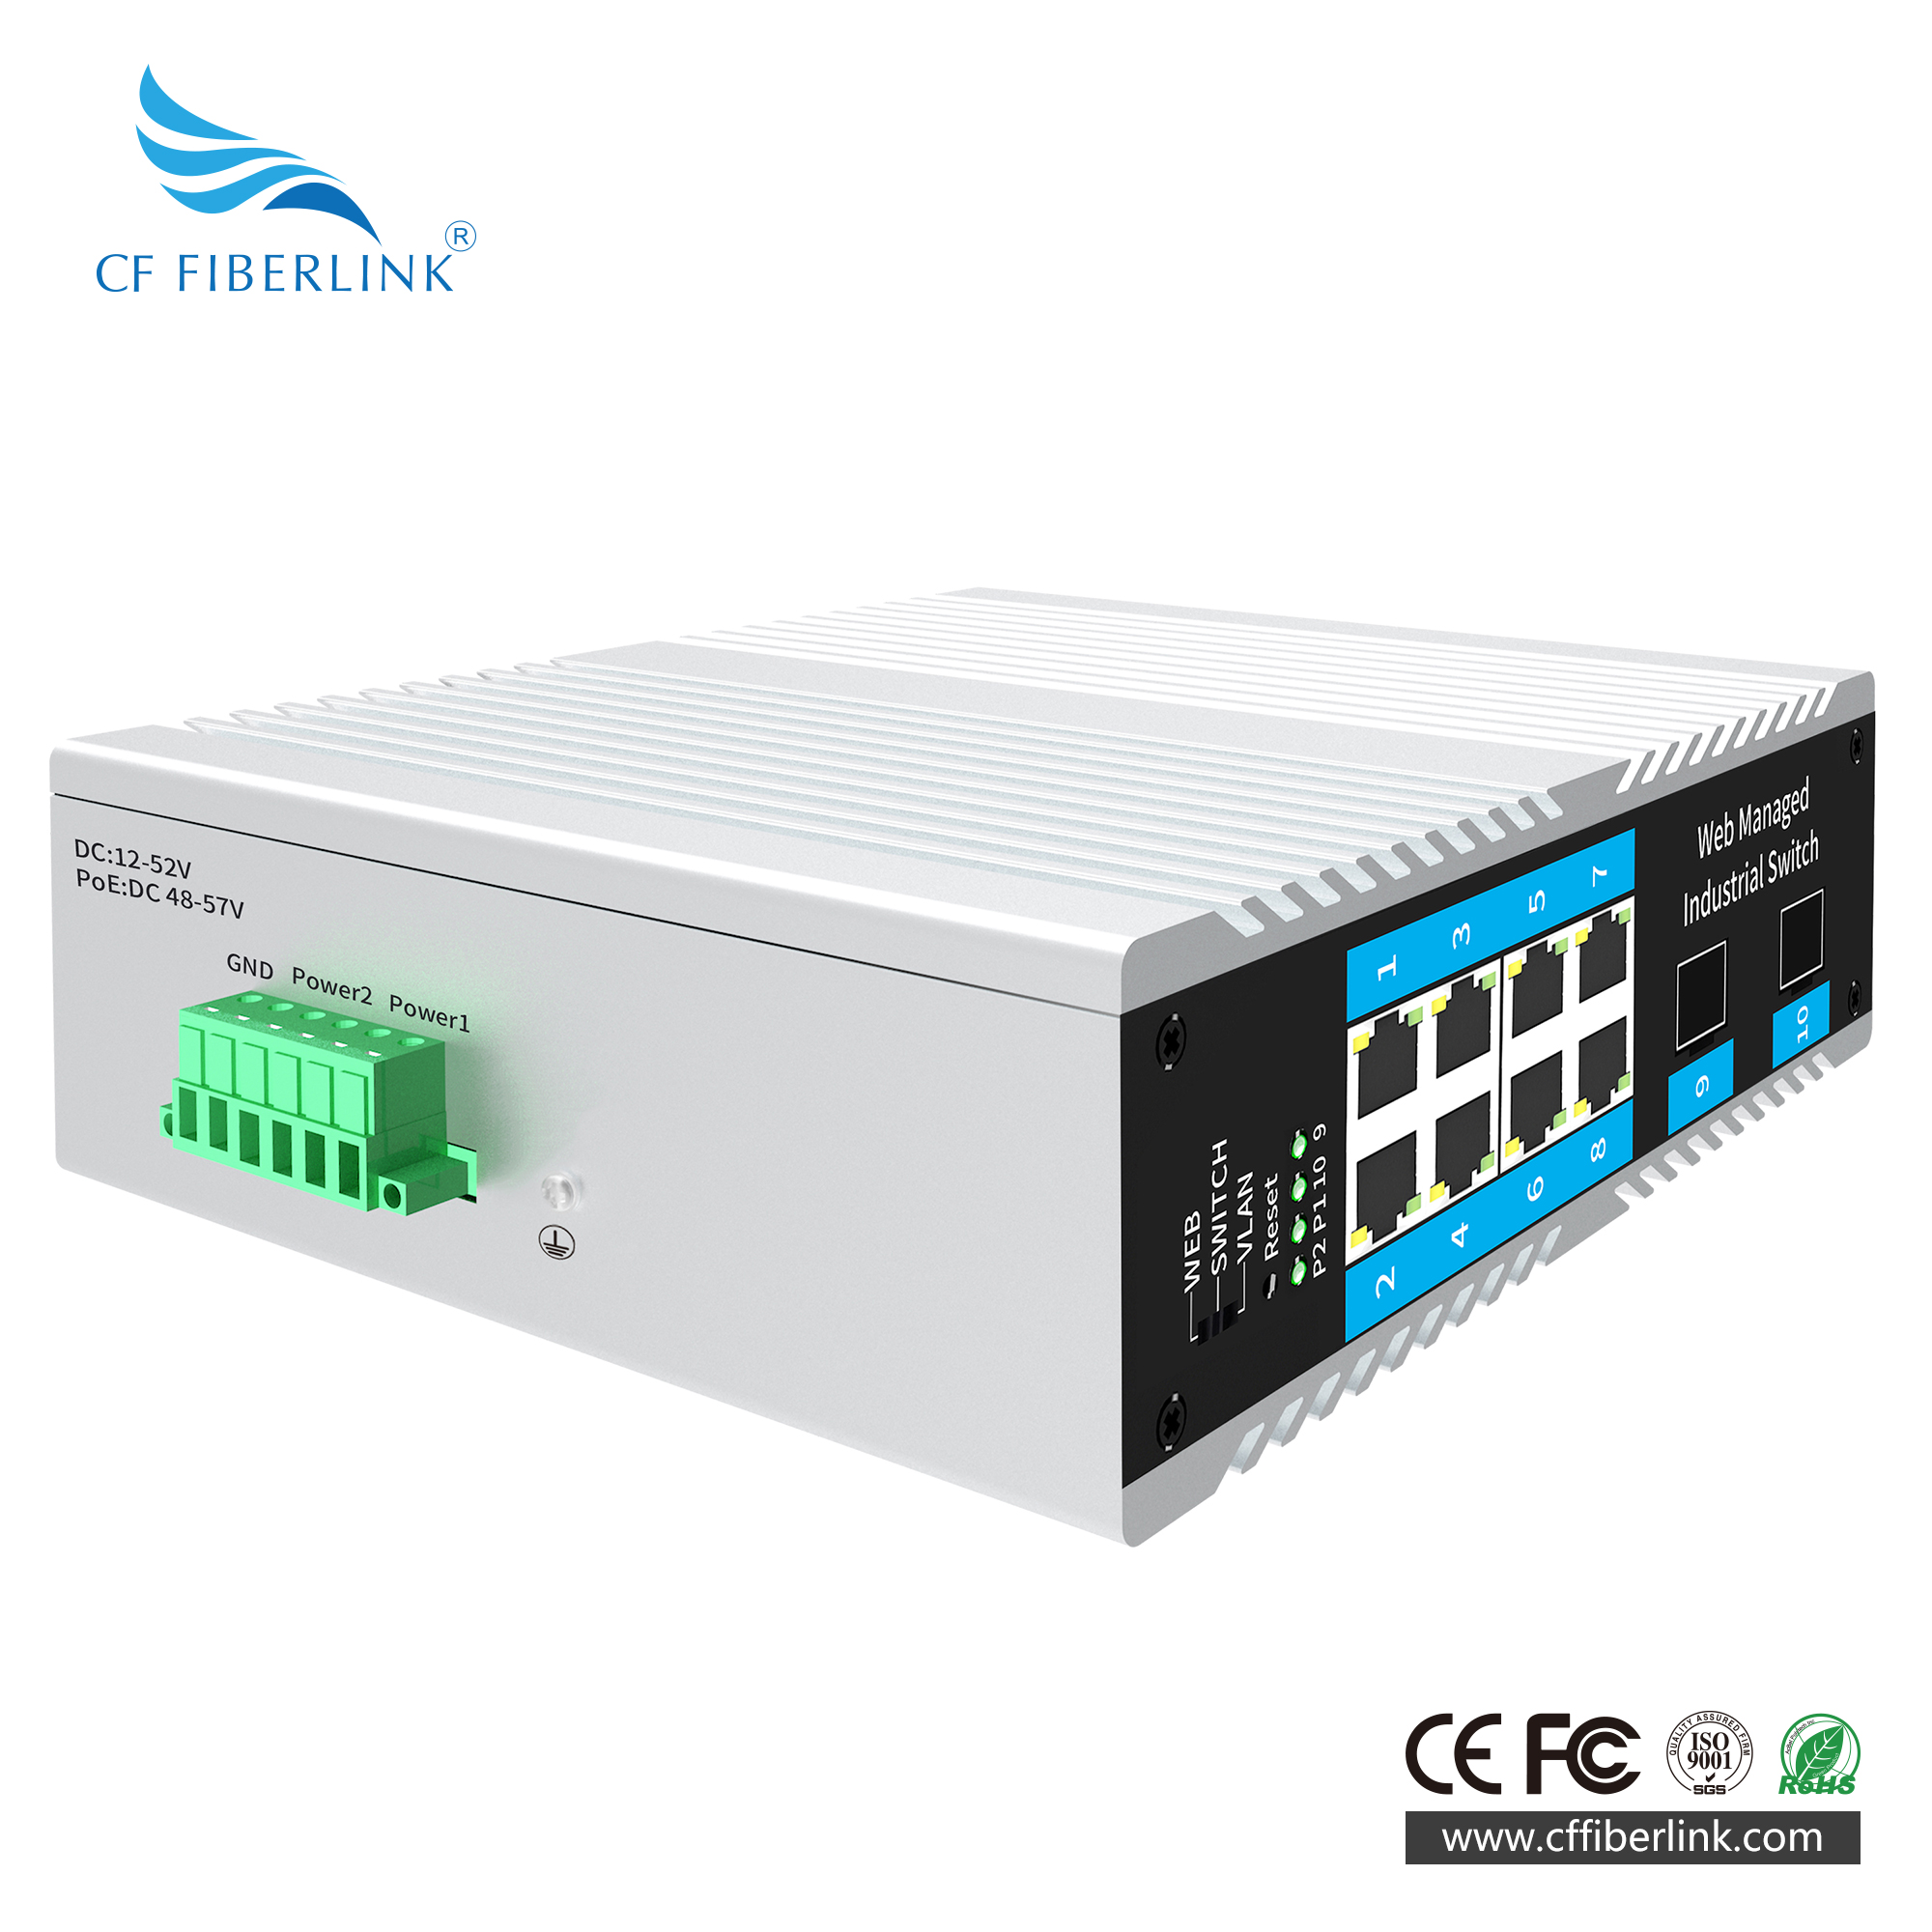 10-port 10/100M/1000M L2 WEB Managed Industrial Ethernet Switch with SFP interface